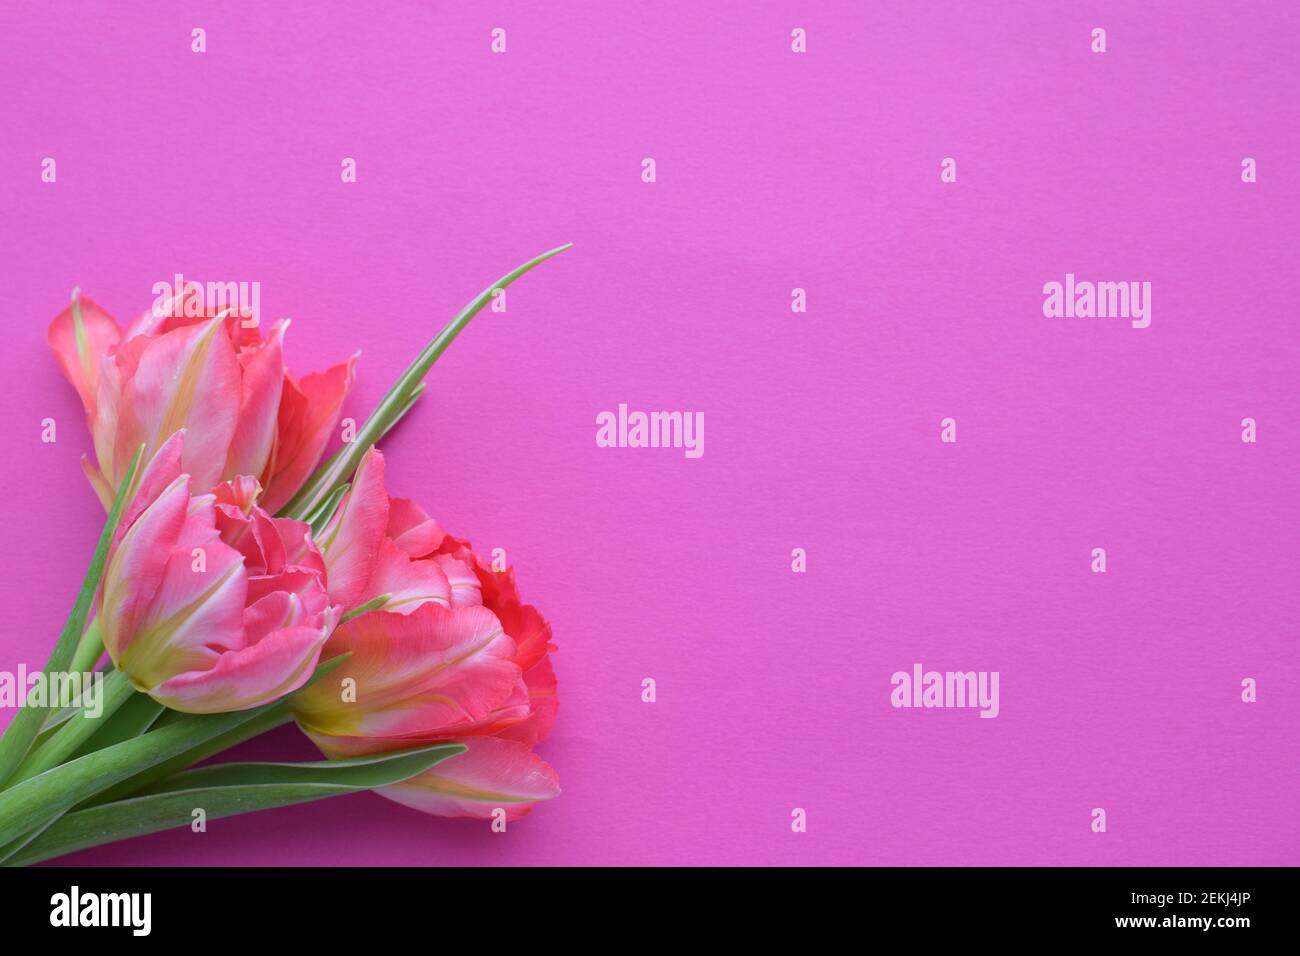 Bouquet of pink  spring tulips and place for text for Mother's Day or 8 March on a pink background. Top view flat style. Stock Photo